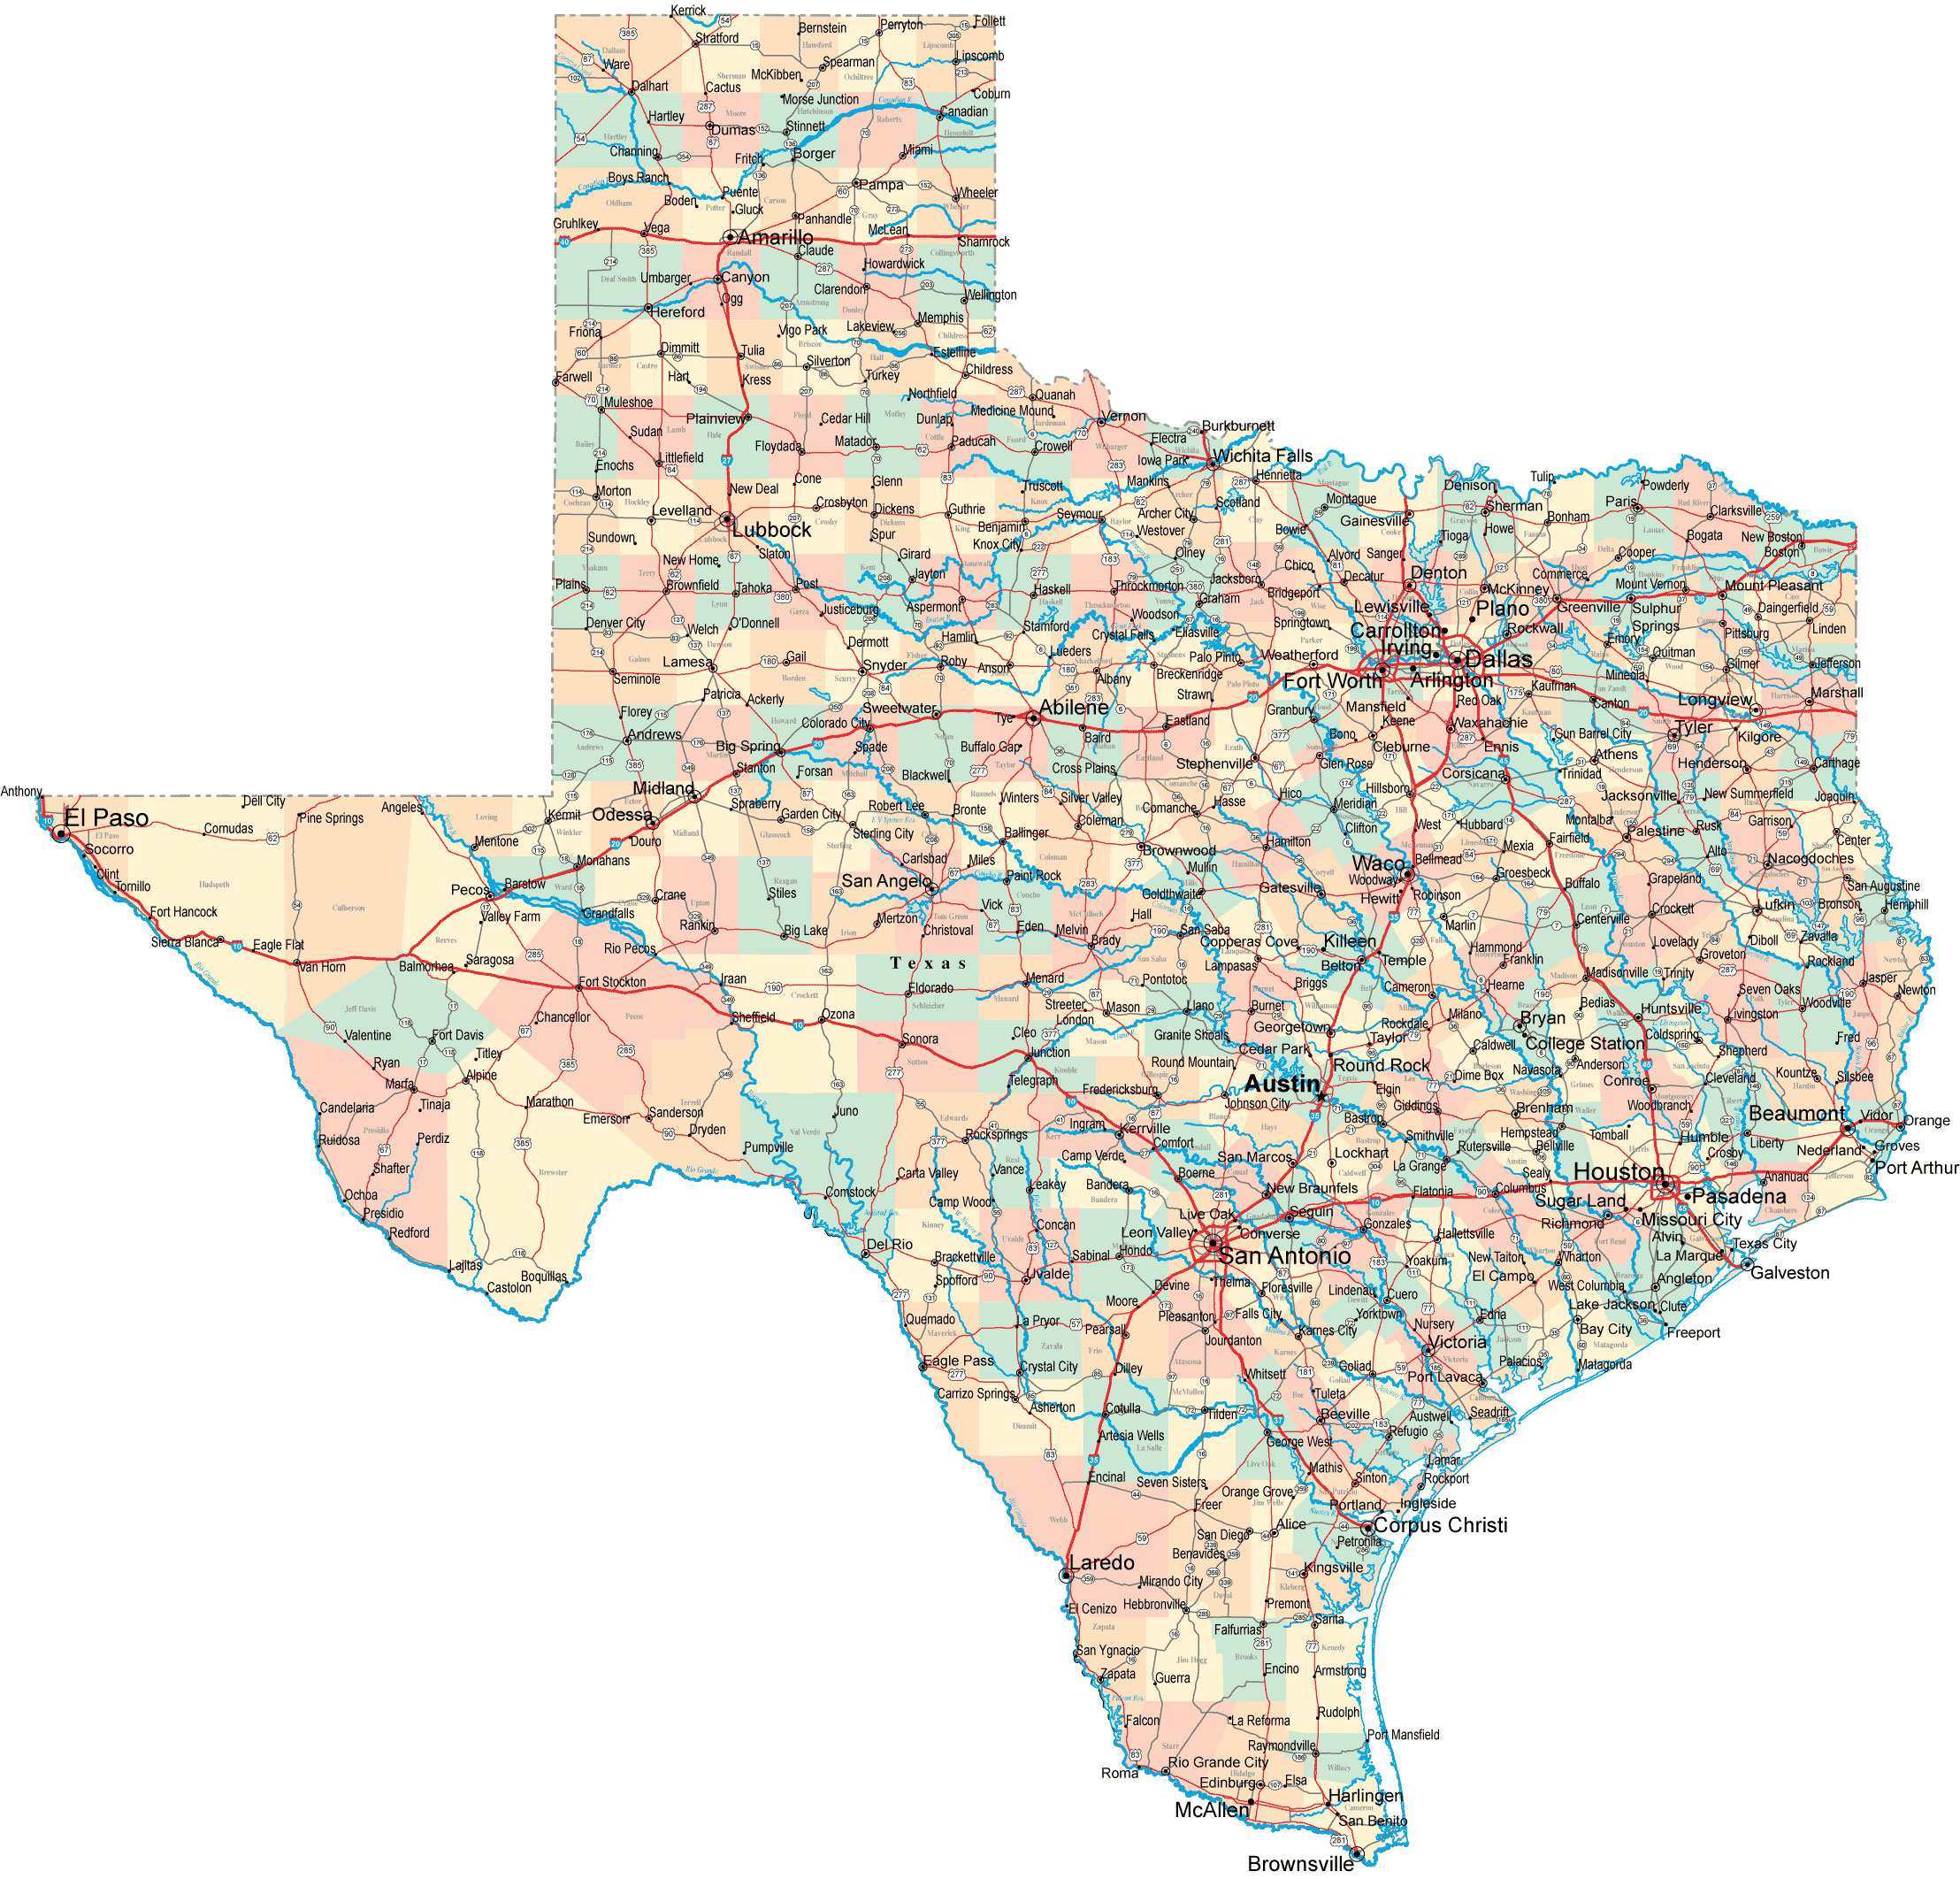 Large Texas Maps For Free Download And Print | High-Resolution And - Interactive Map Of Texas